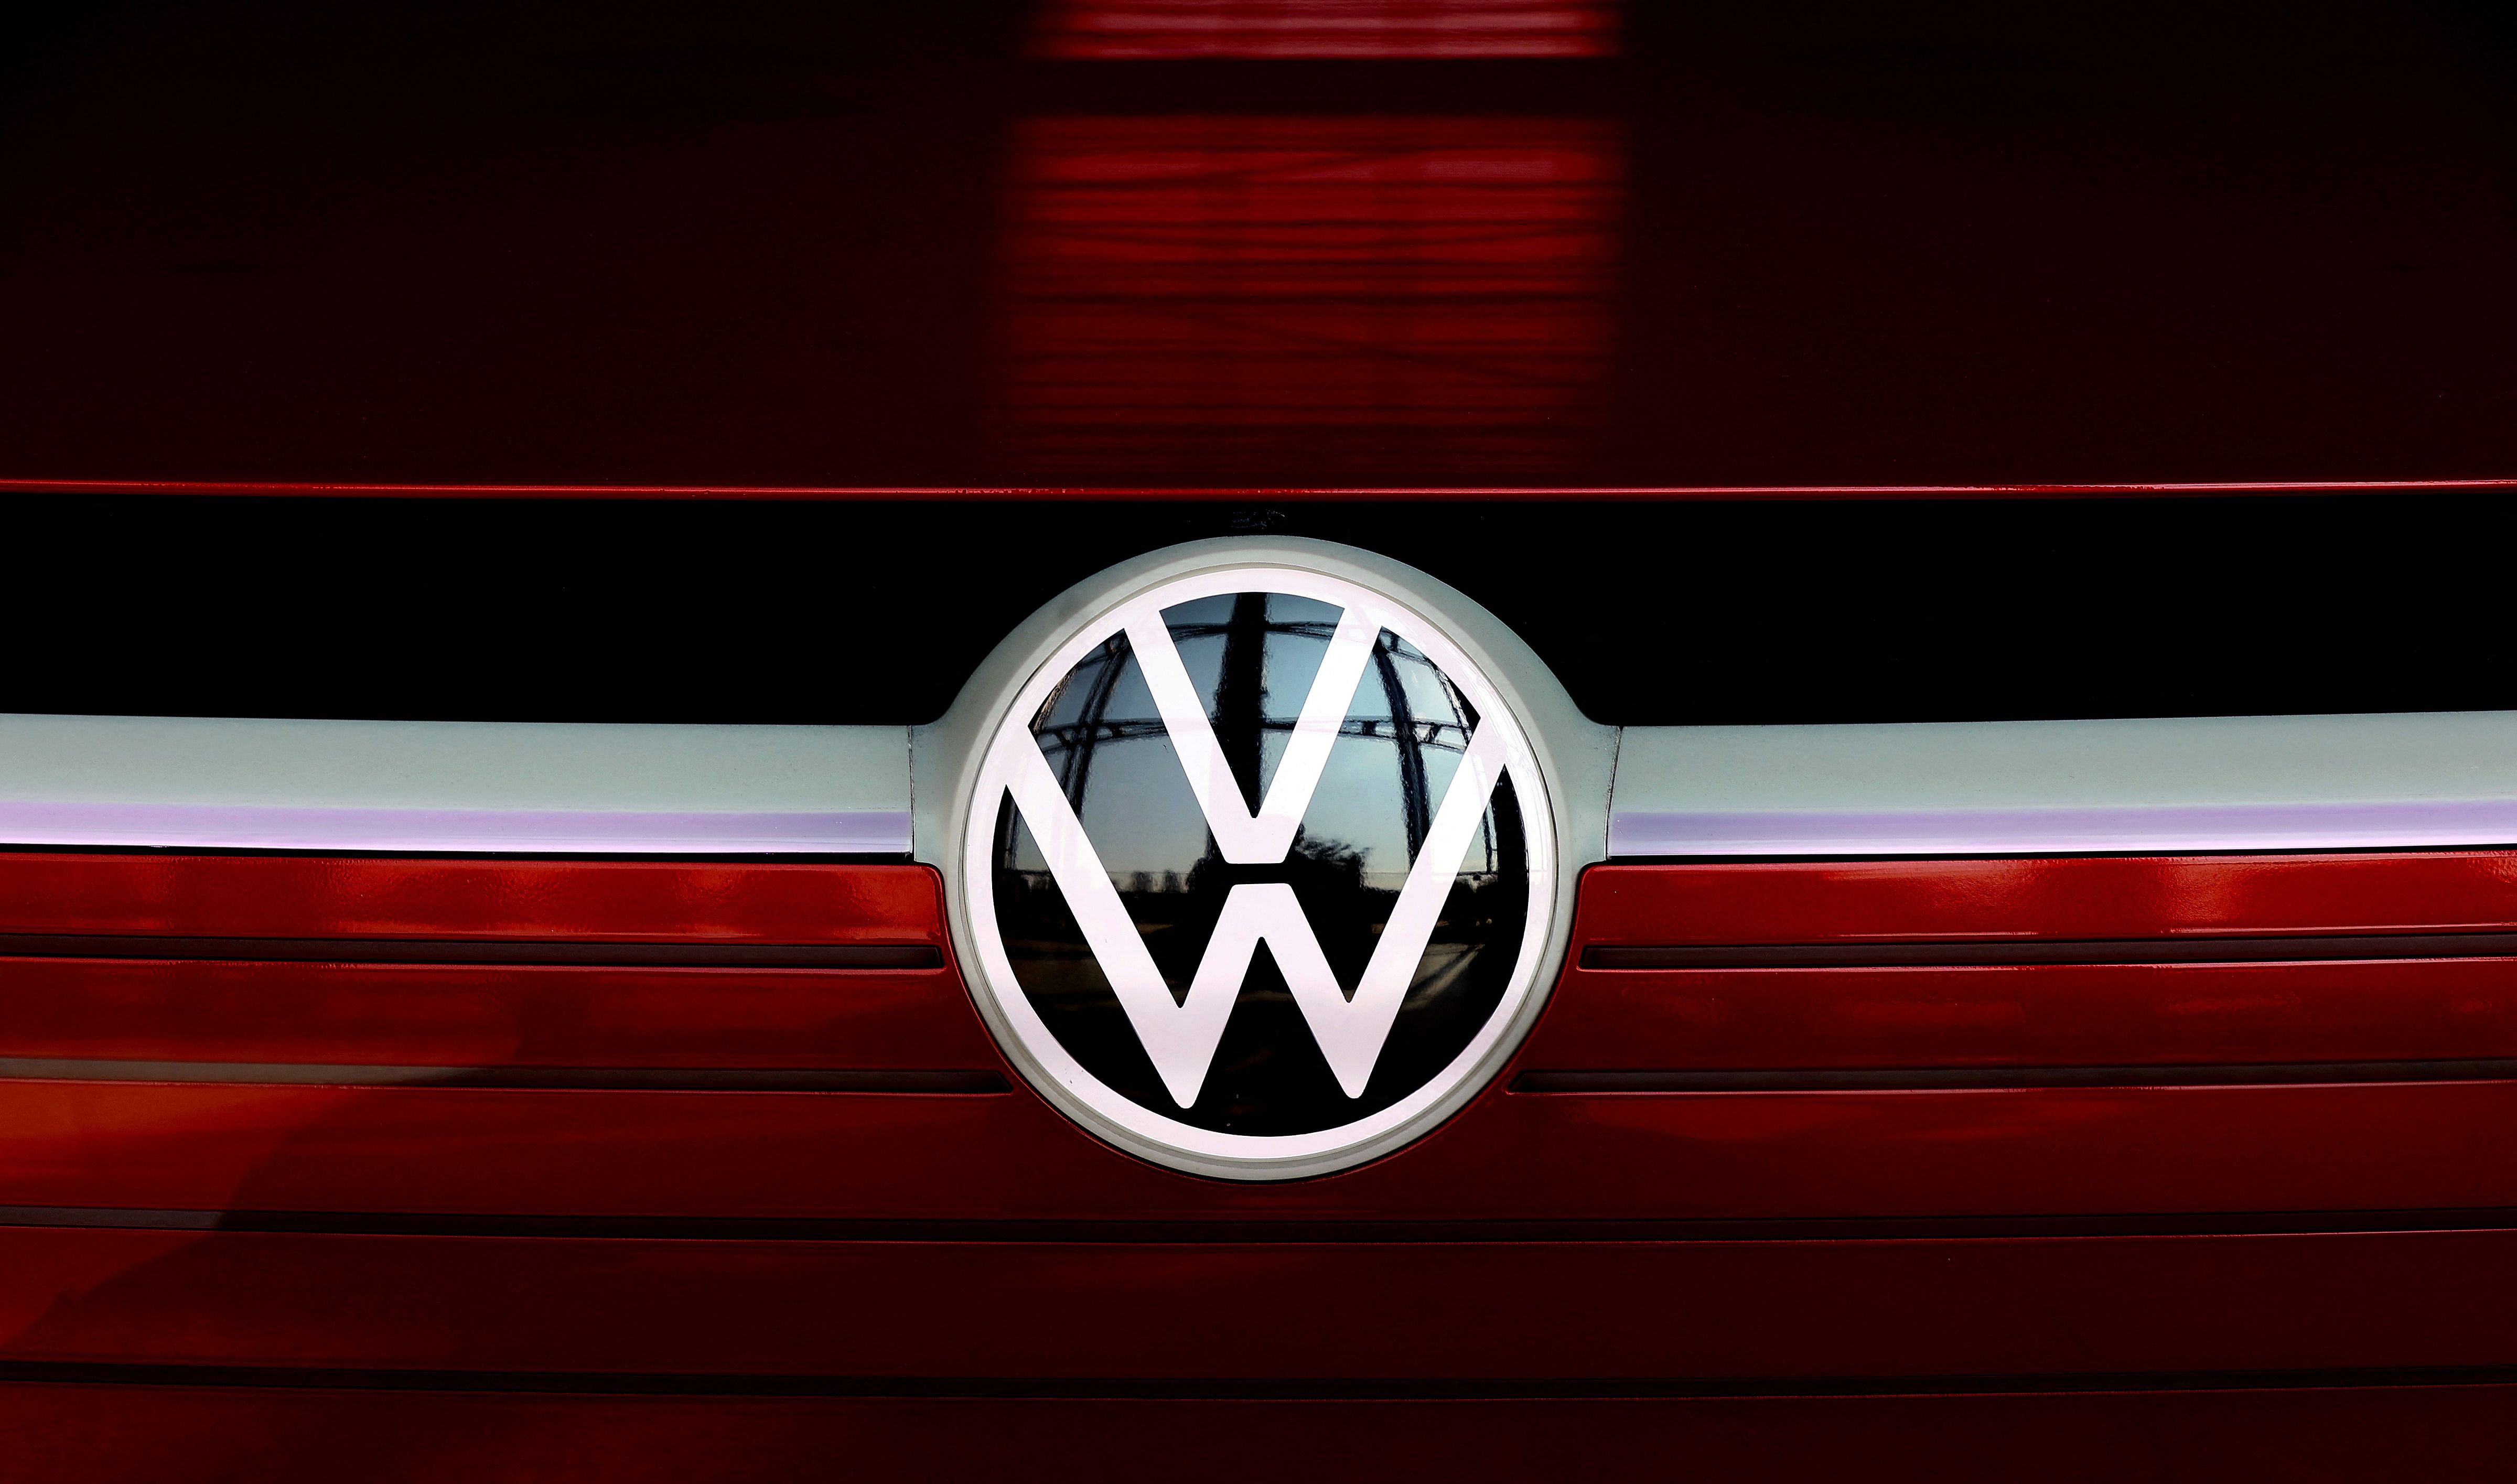 The VW logo is on display at the headquarters of German carmaker Volkswagen. Credit: AFP Photo